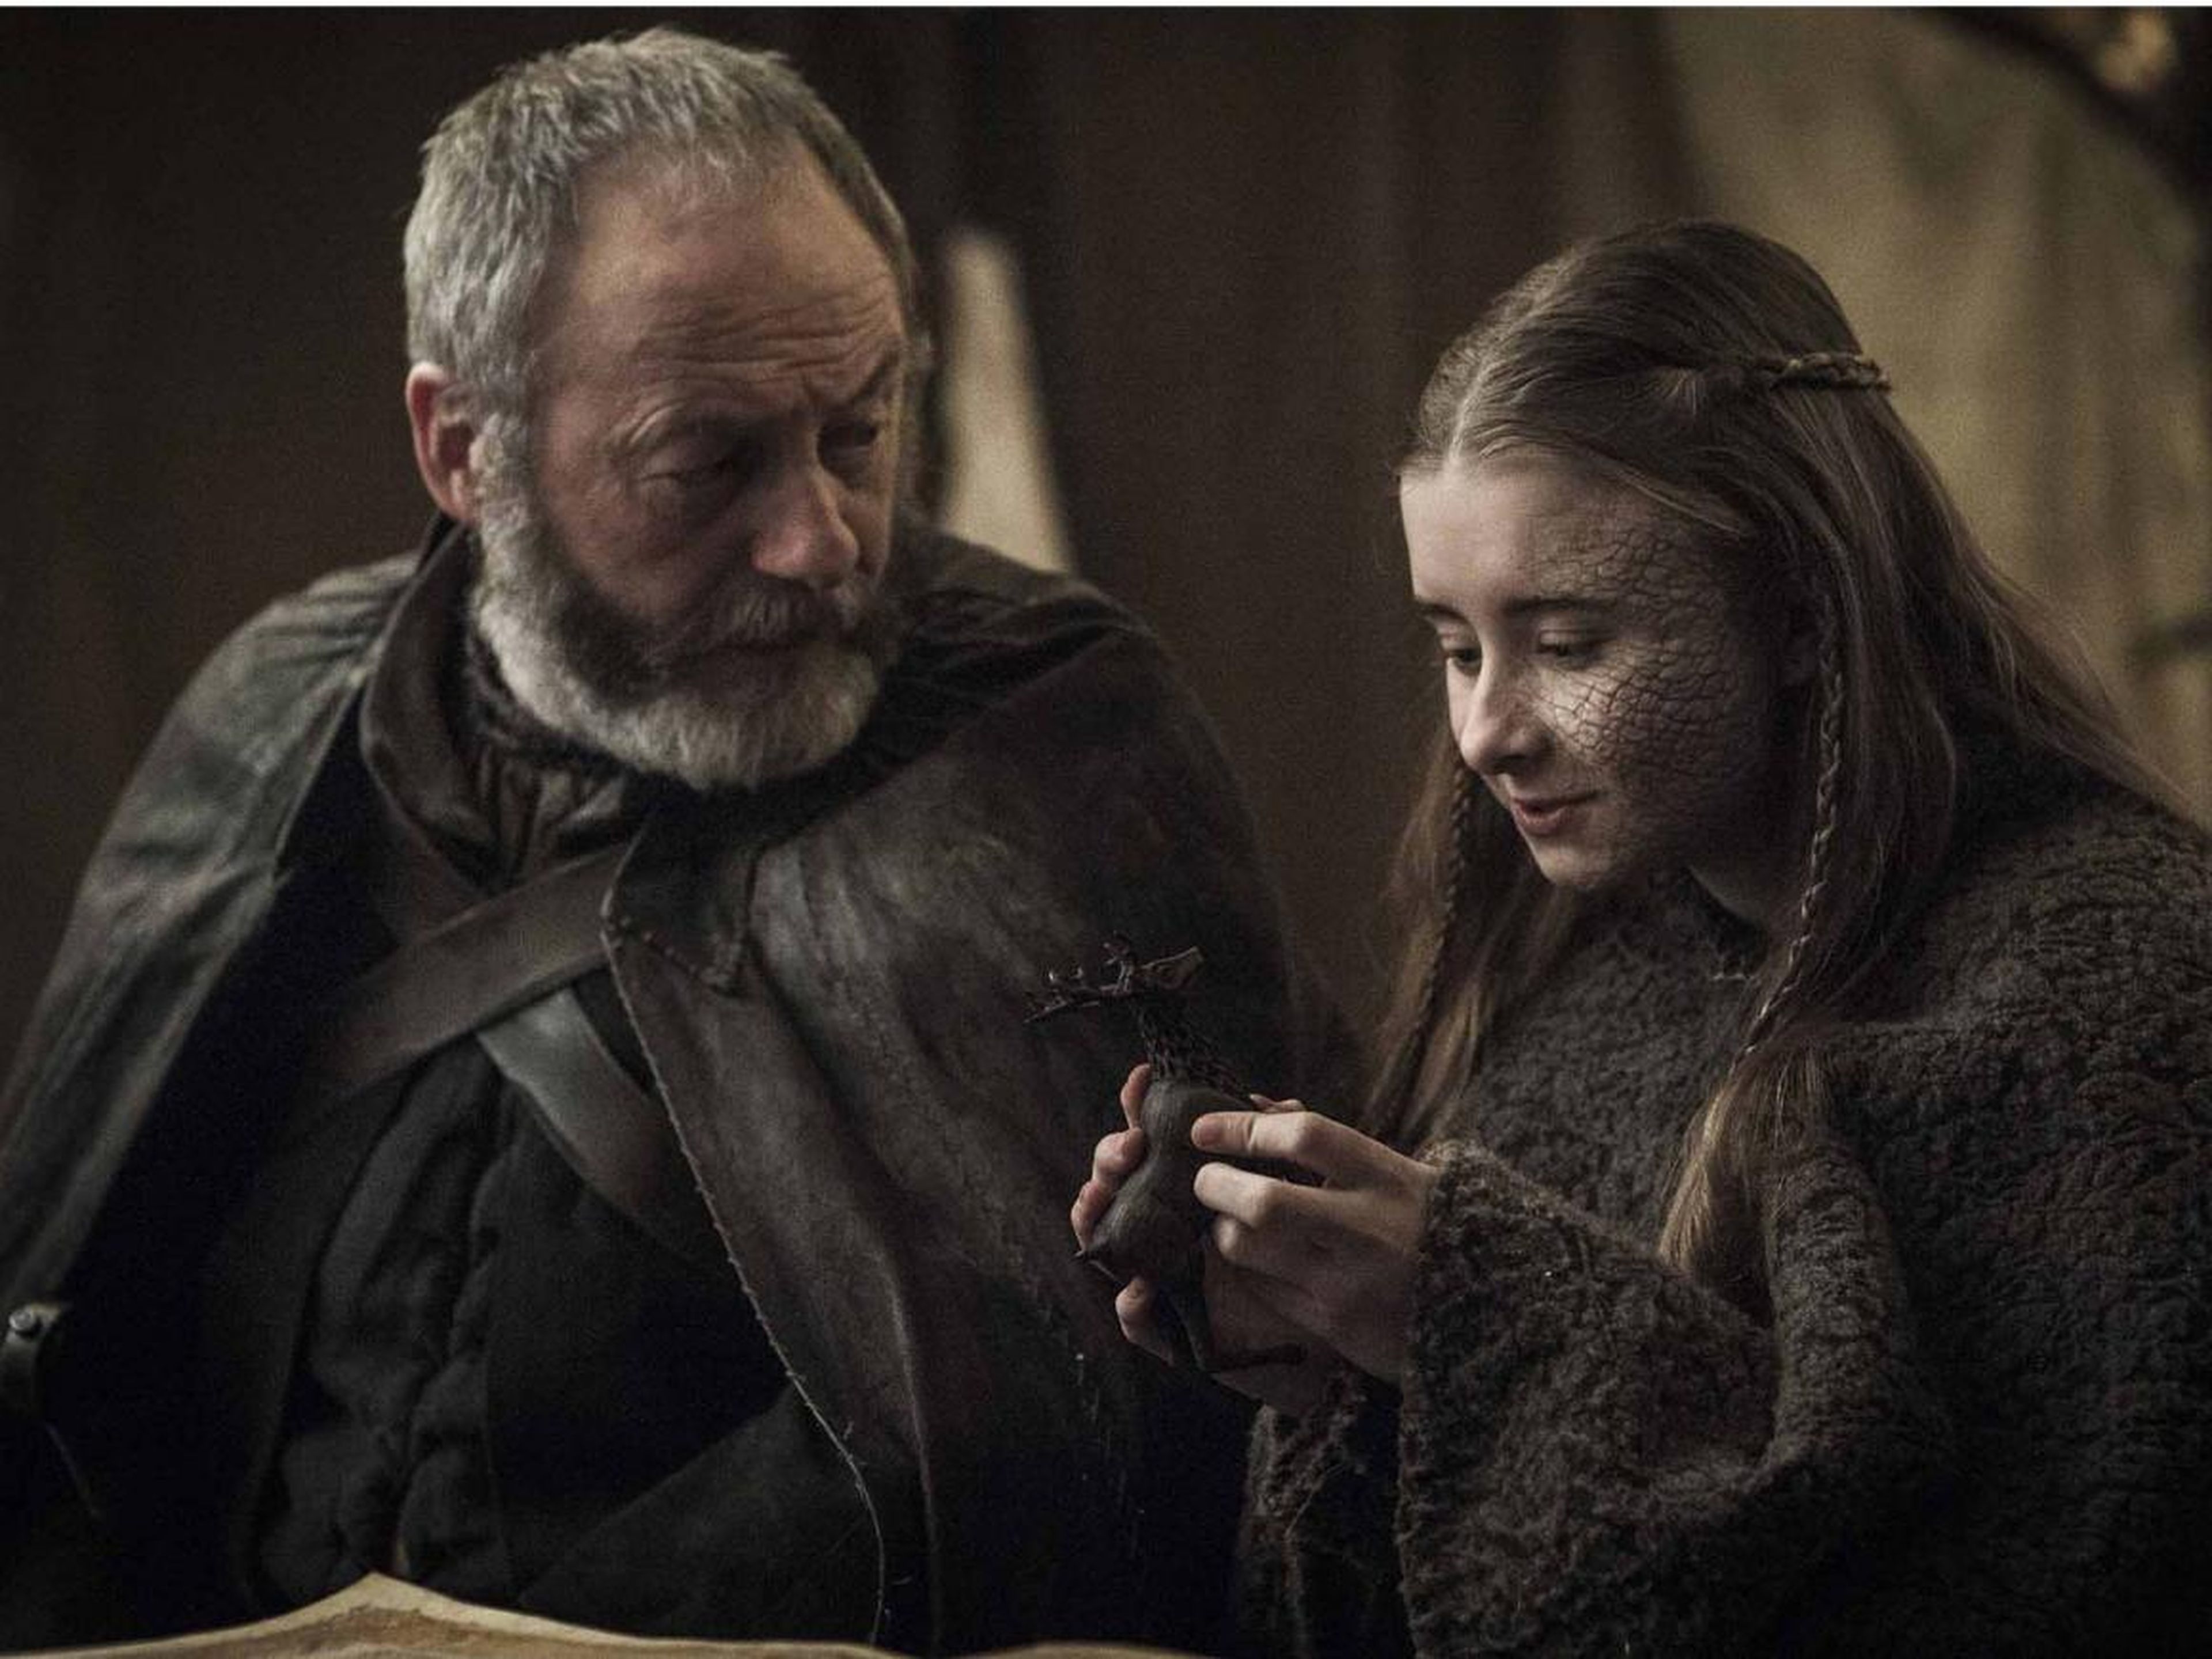 Davos and Shireen with each other for the last time on "Game of Thrones."